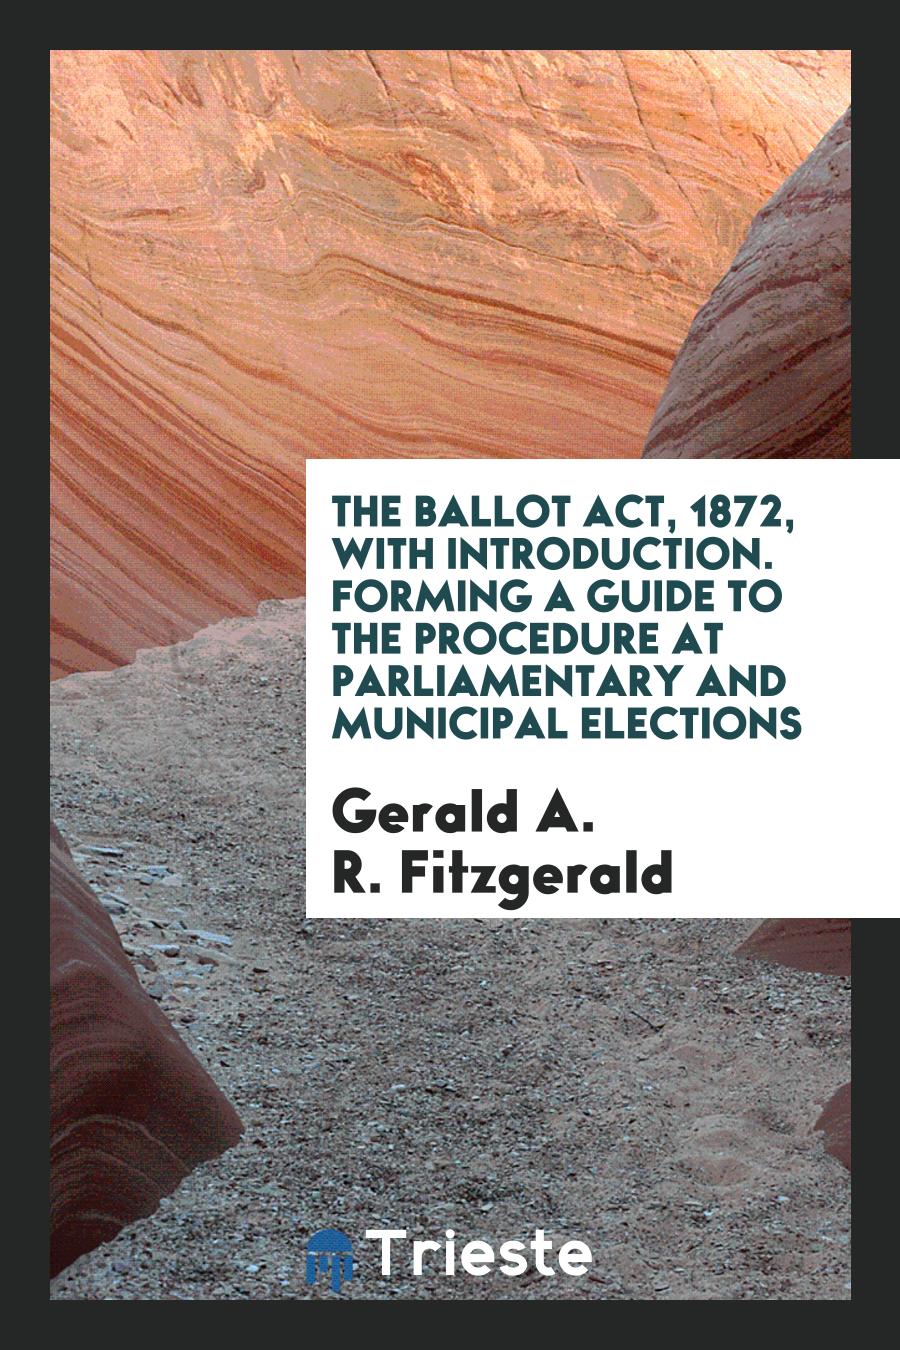 The Ballot Act, 1872, with Introduction. Forming a Guide to the Procedure at Parliamentary and Municipal Elections